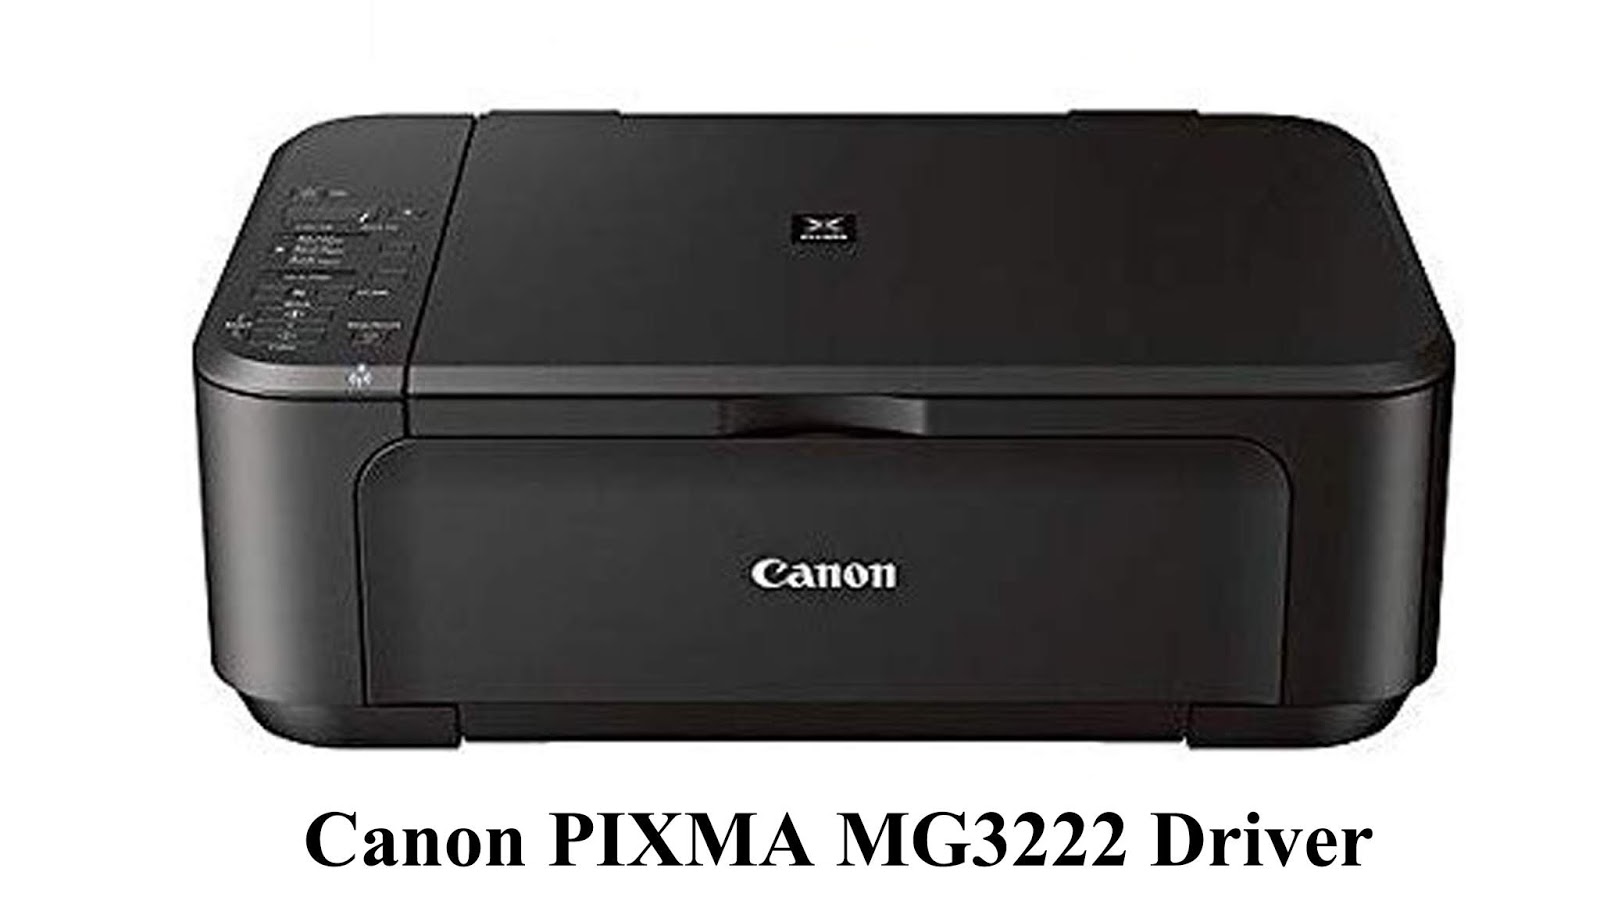 Canon PIXMA MG3222 Driver Downloads | MG Series Software Free